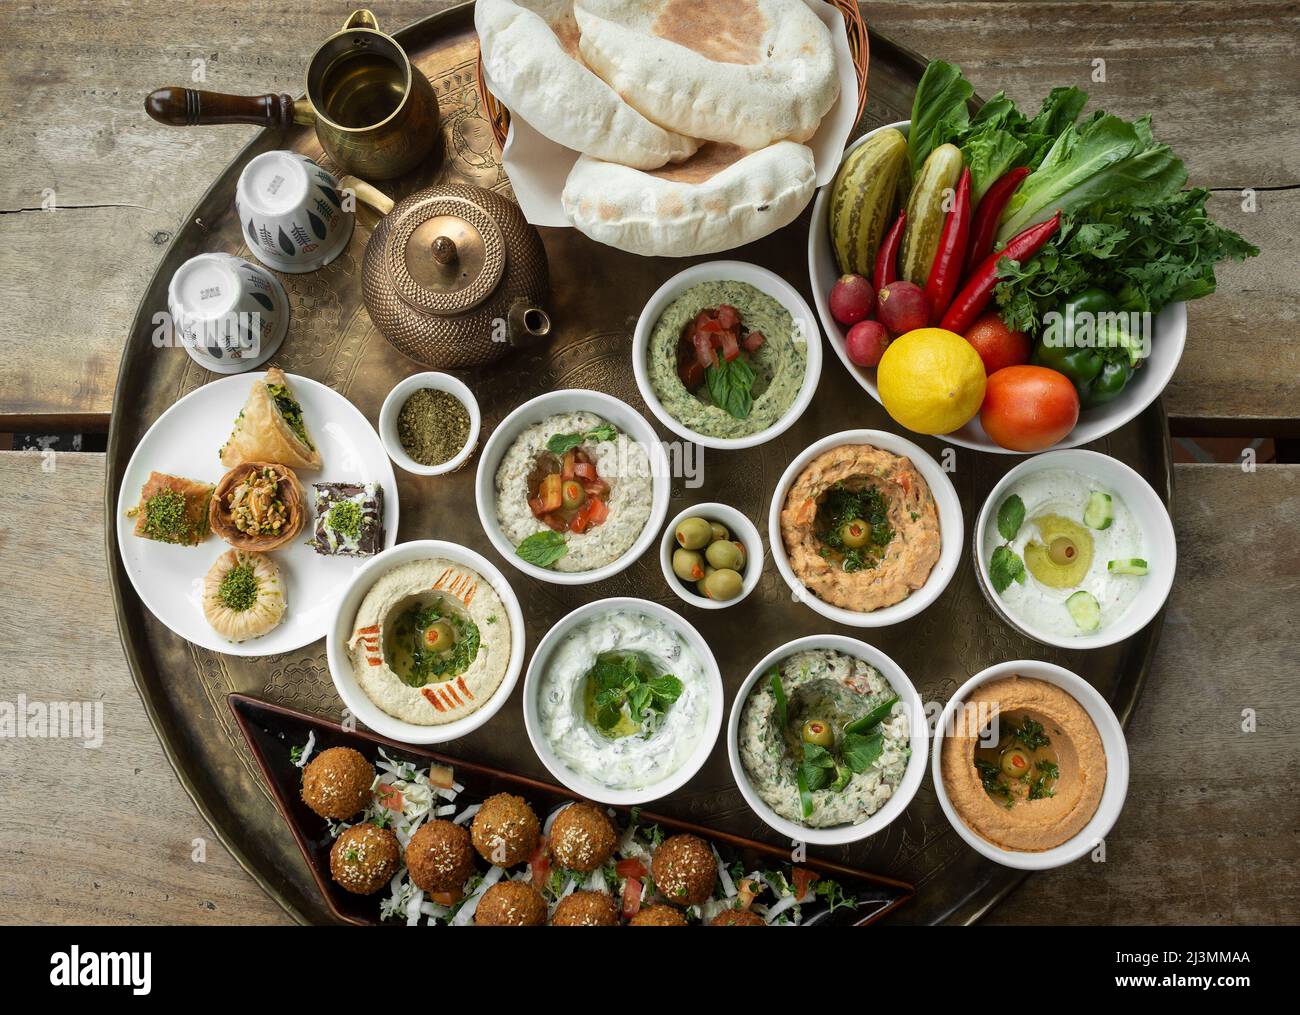 mixed middle eastern meze vegetarian food sharing platter in istanbul turkish restaurant Stock Photo